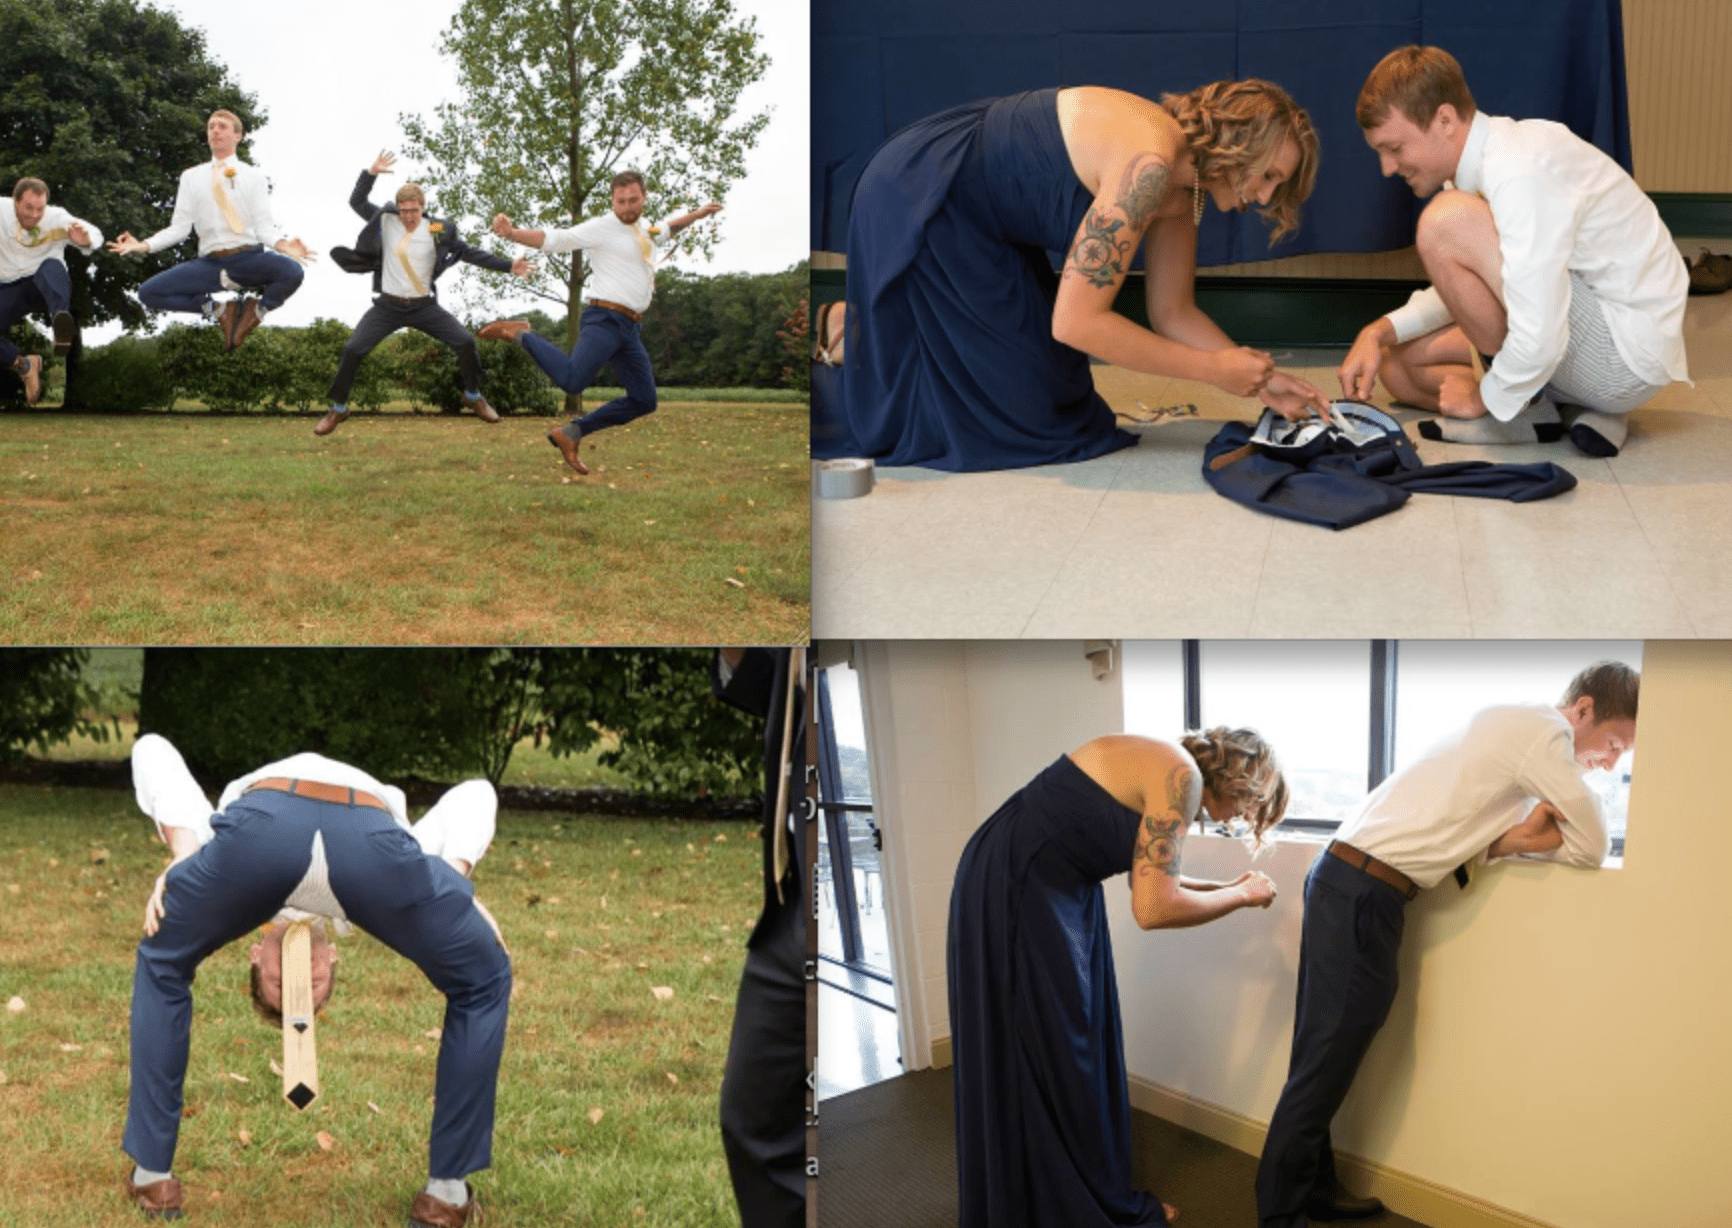 Groom tore his pants so his bride helped fix the issue. | Source: imgur.com/2gLPTYY